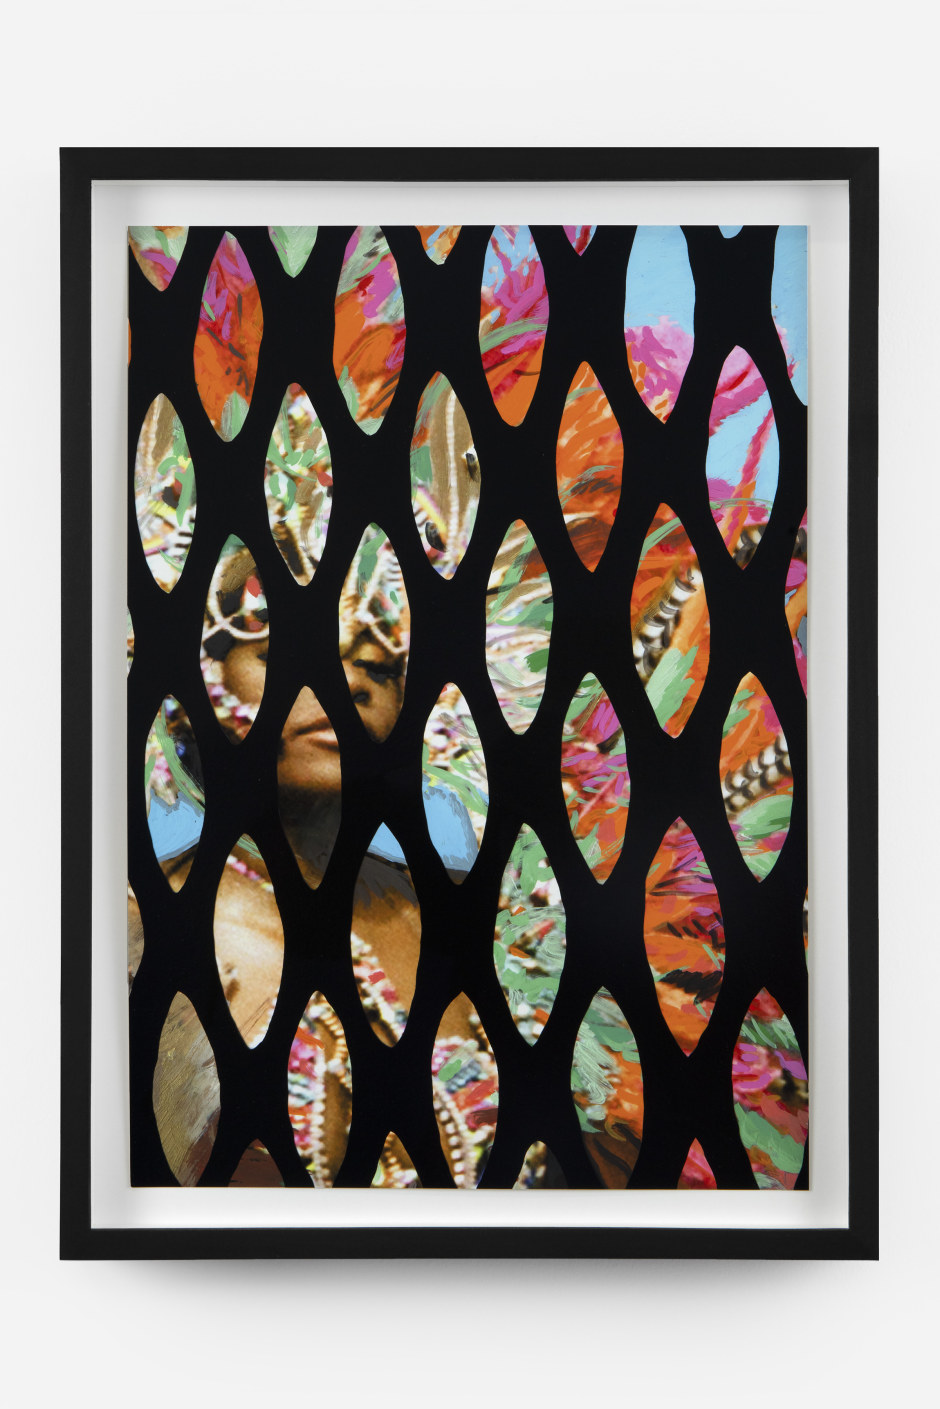 Paul Anthony Smith  Out of Many  2023  digital pigment print with gloss enamel silkscreen overlay, 2 hits overlay  42 x 29.7 cm / 16 1⁄2 x 11 5⁄8 in  edition of 50 + 15 a/p  Produced by K2